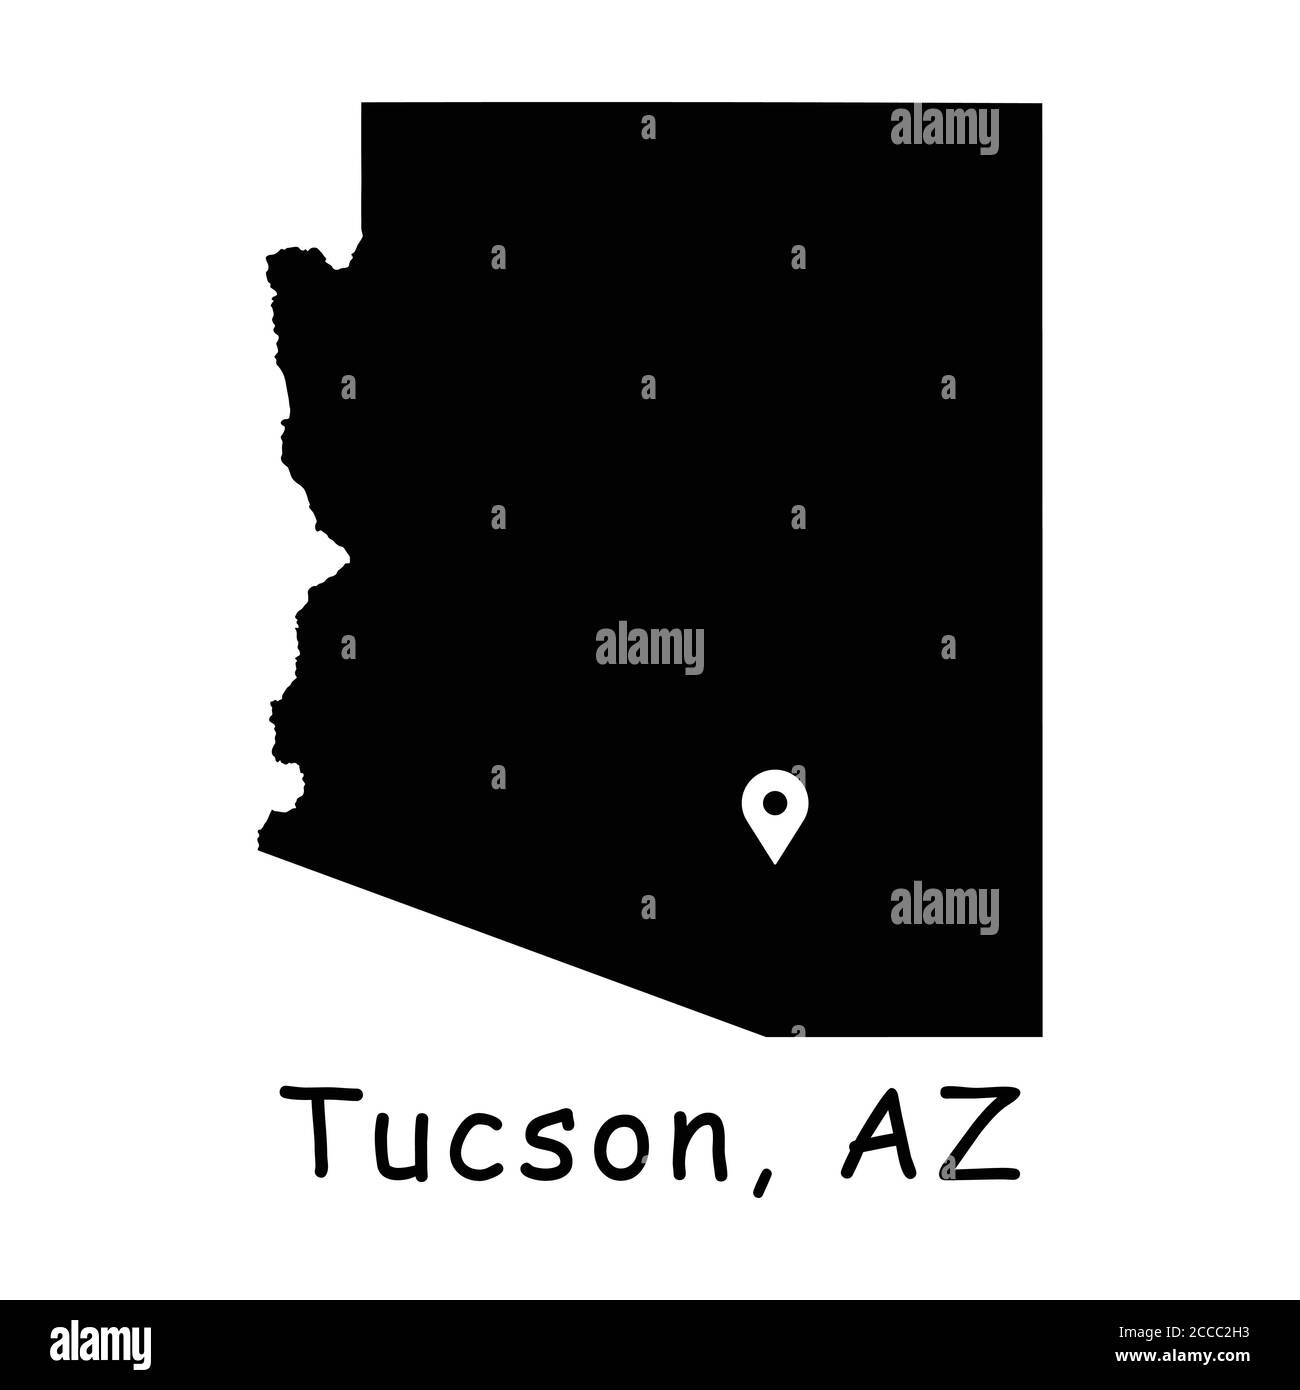 Tucson on Arizona State Map. Detailed AZ State Map with Location Pin on Tucson City. Black silhouette vector map isolated on white background. Stock Vector